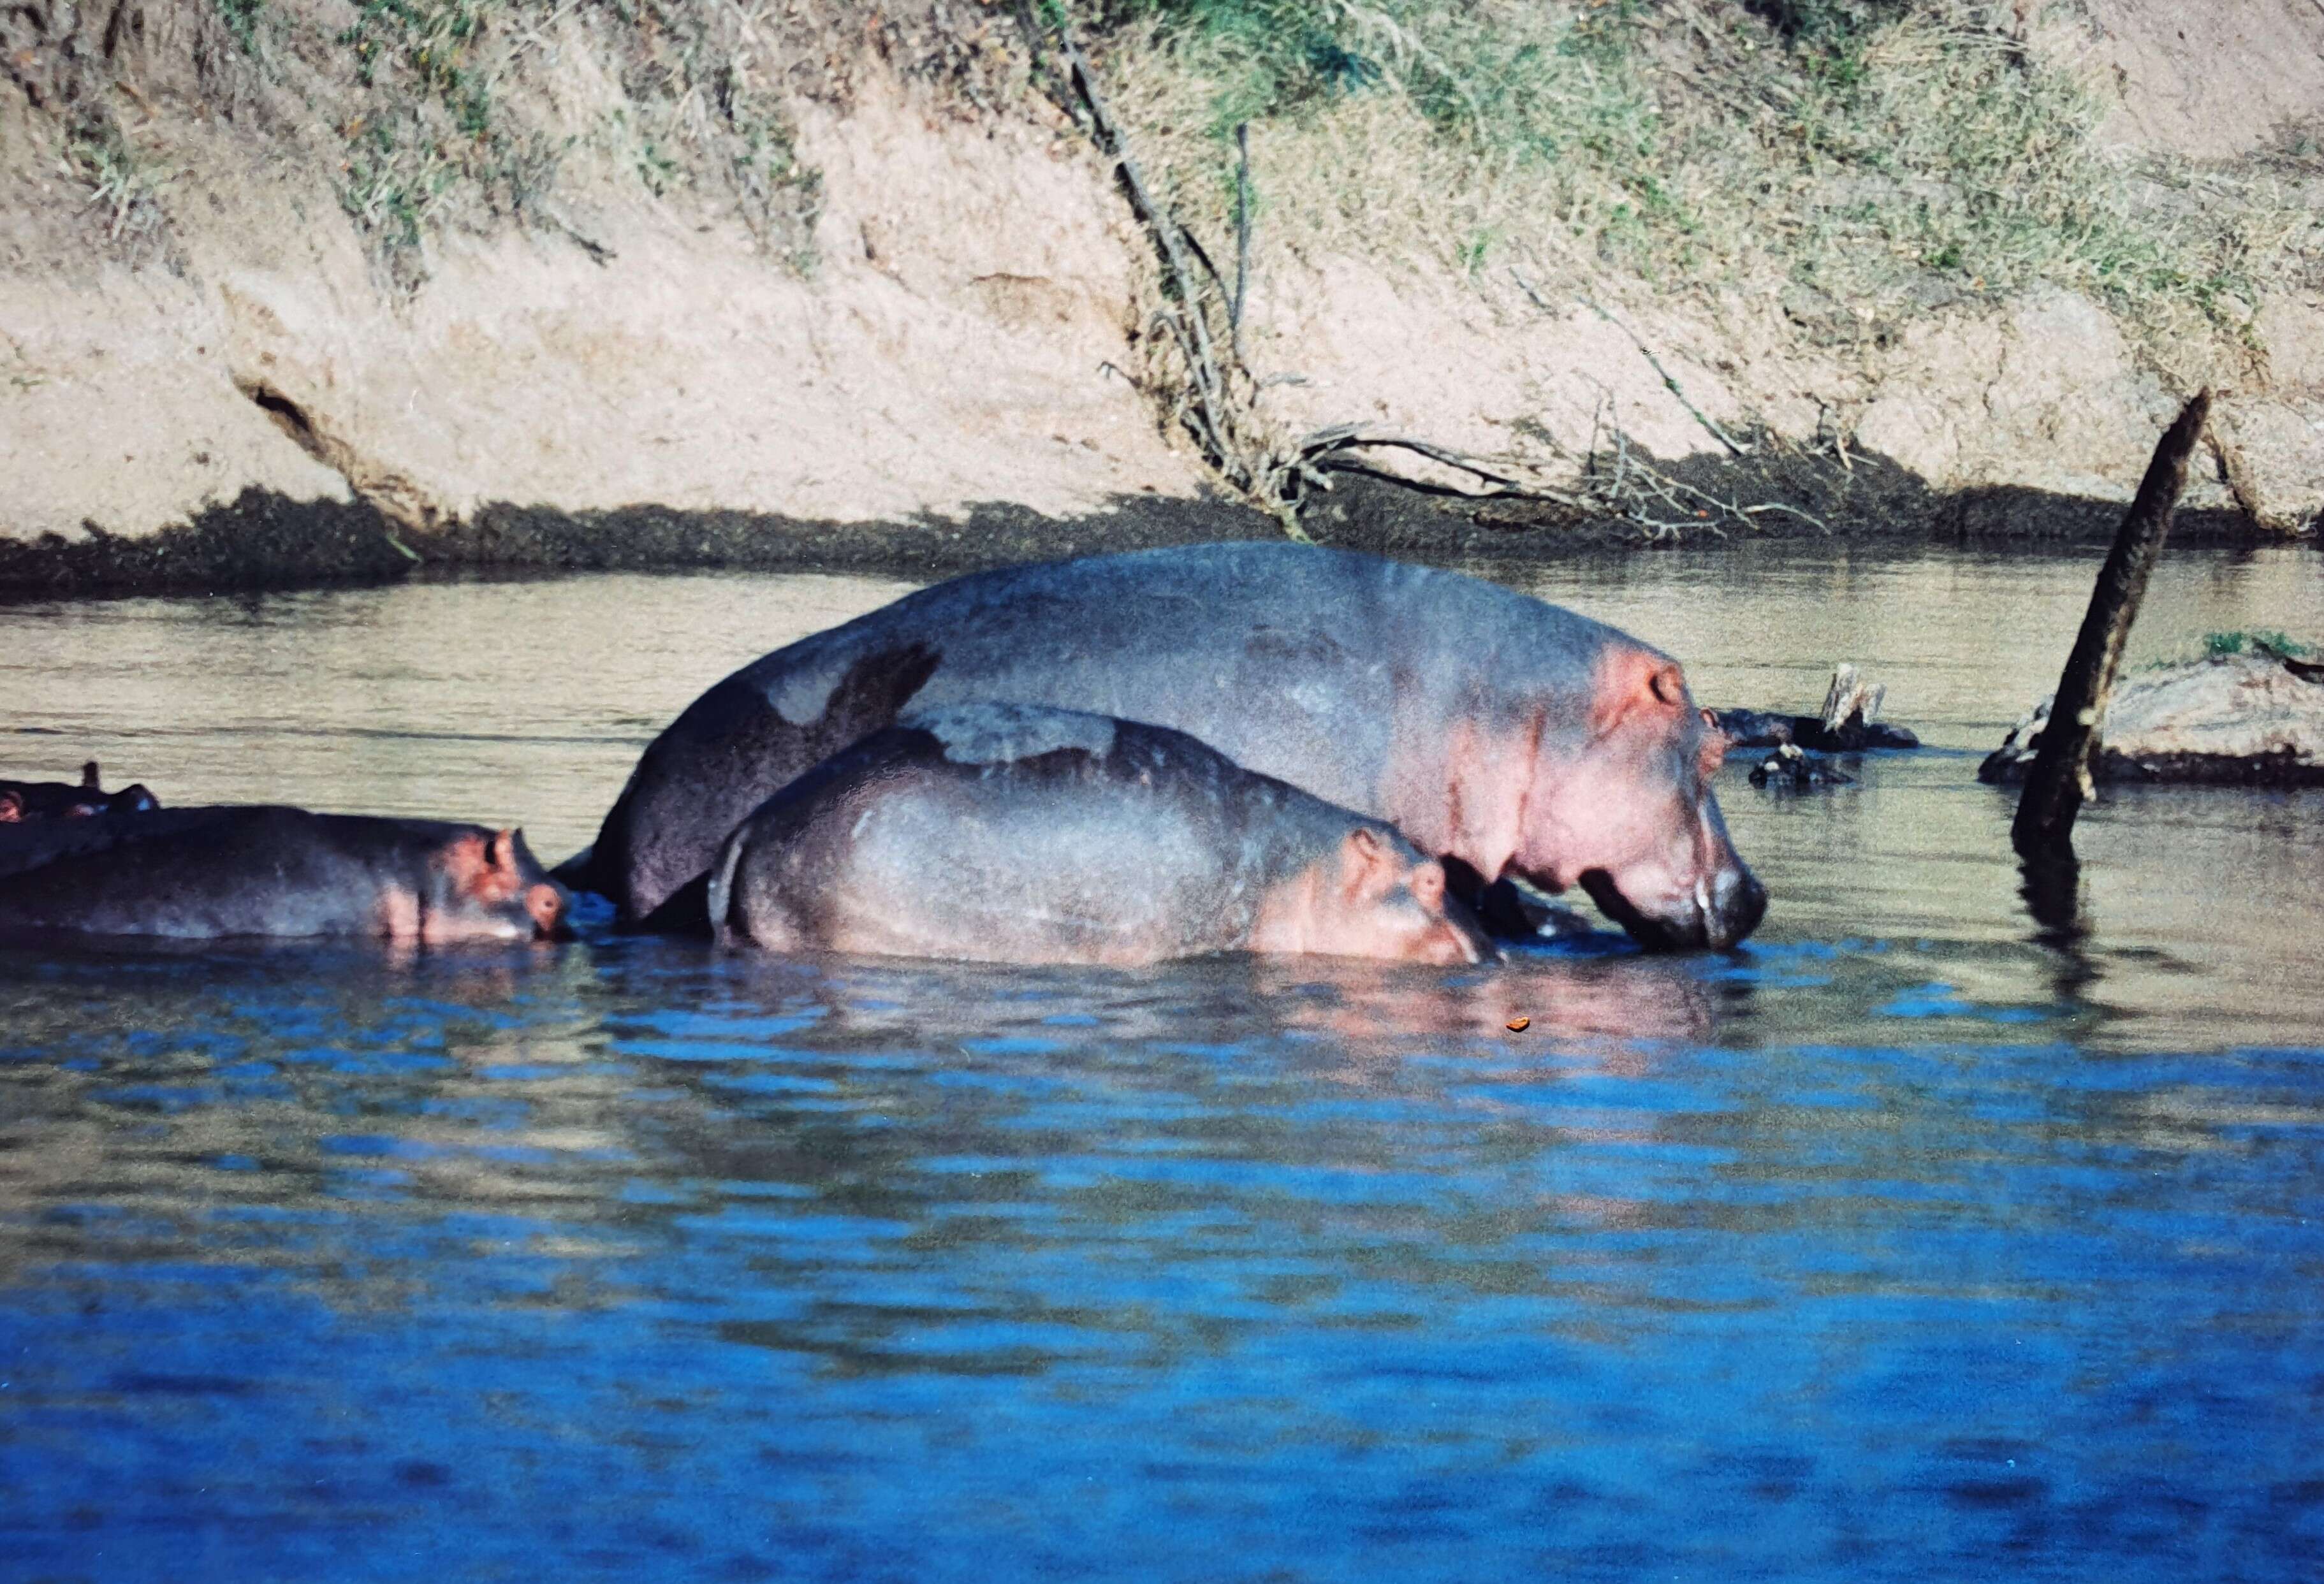 Image of Hippopotomus